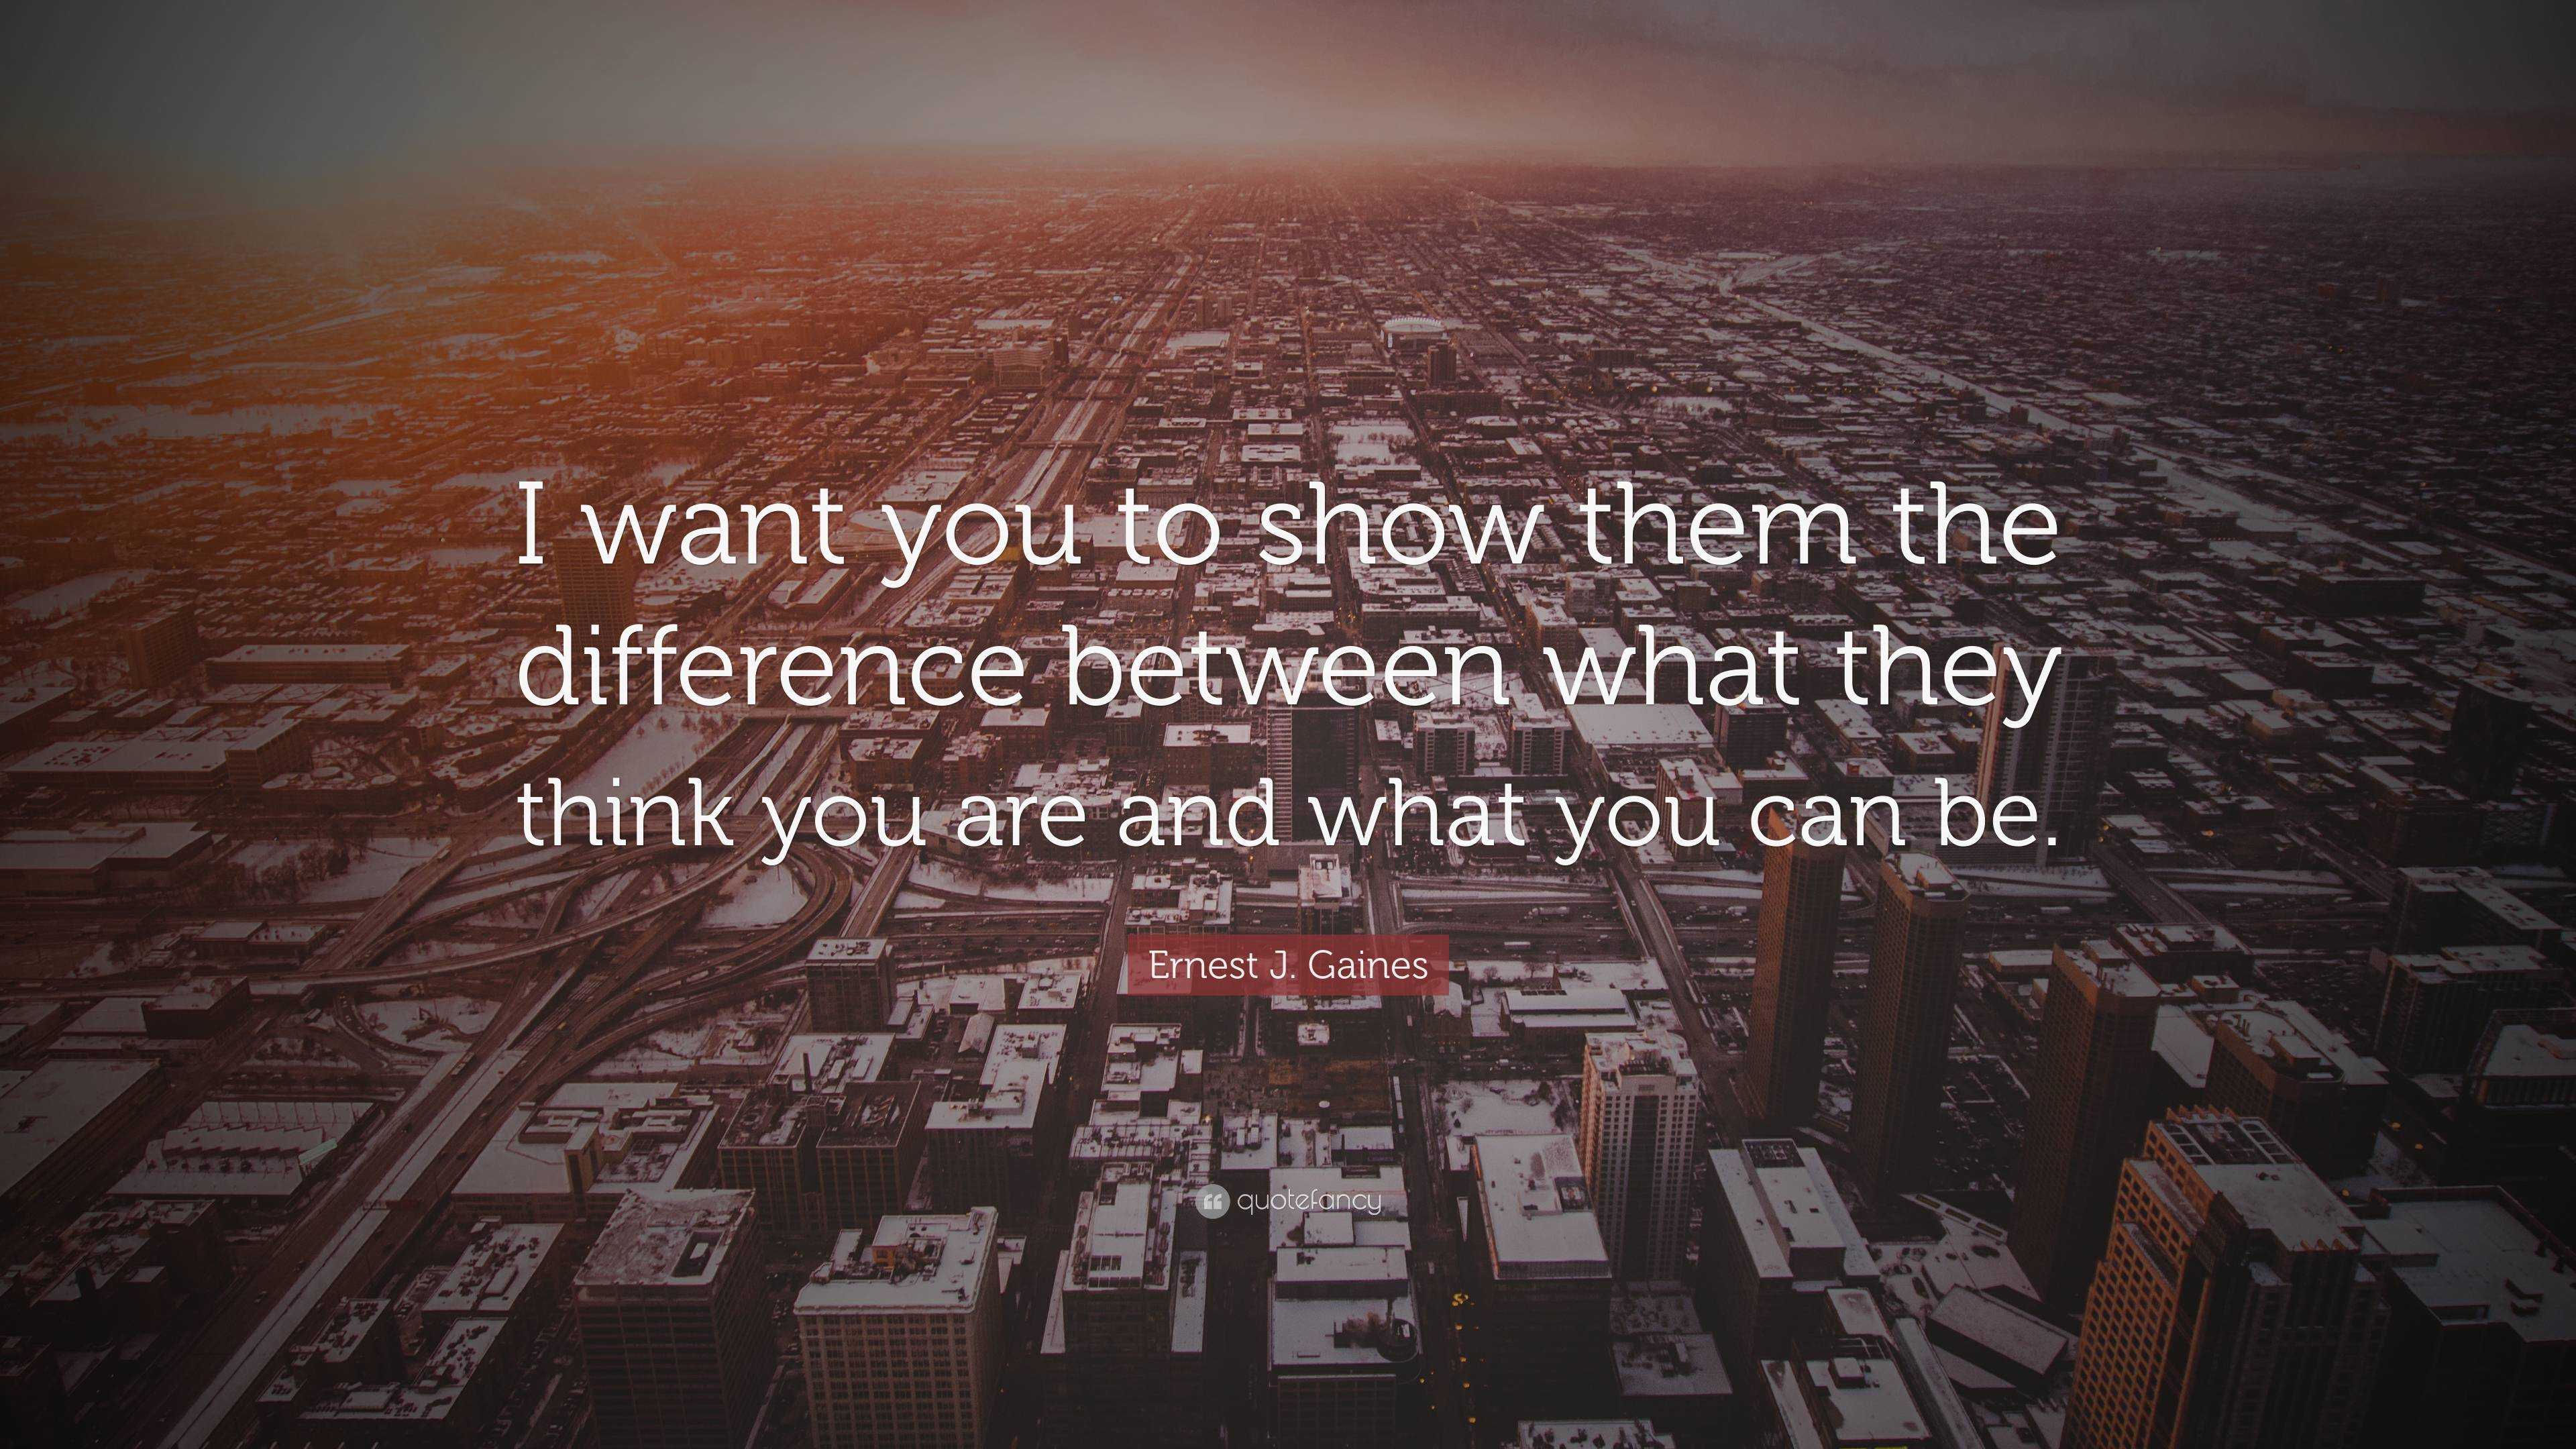 Ernest J. Gaines Quote: “I want you to show them the difference between ...